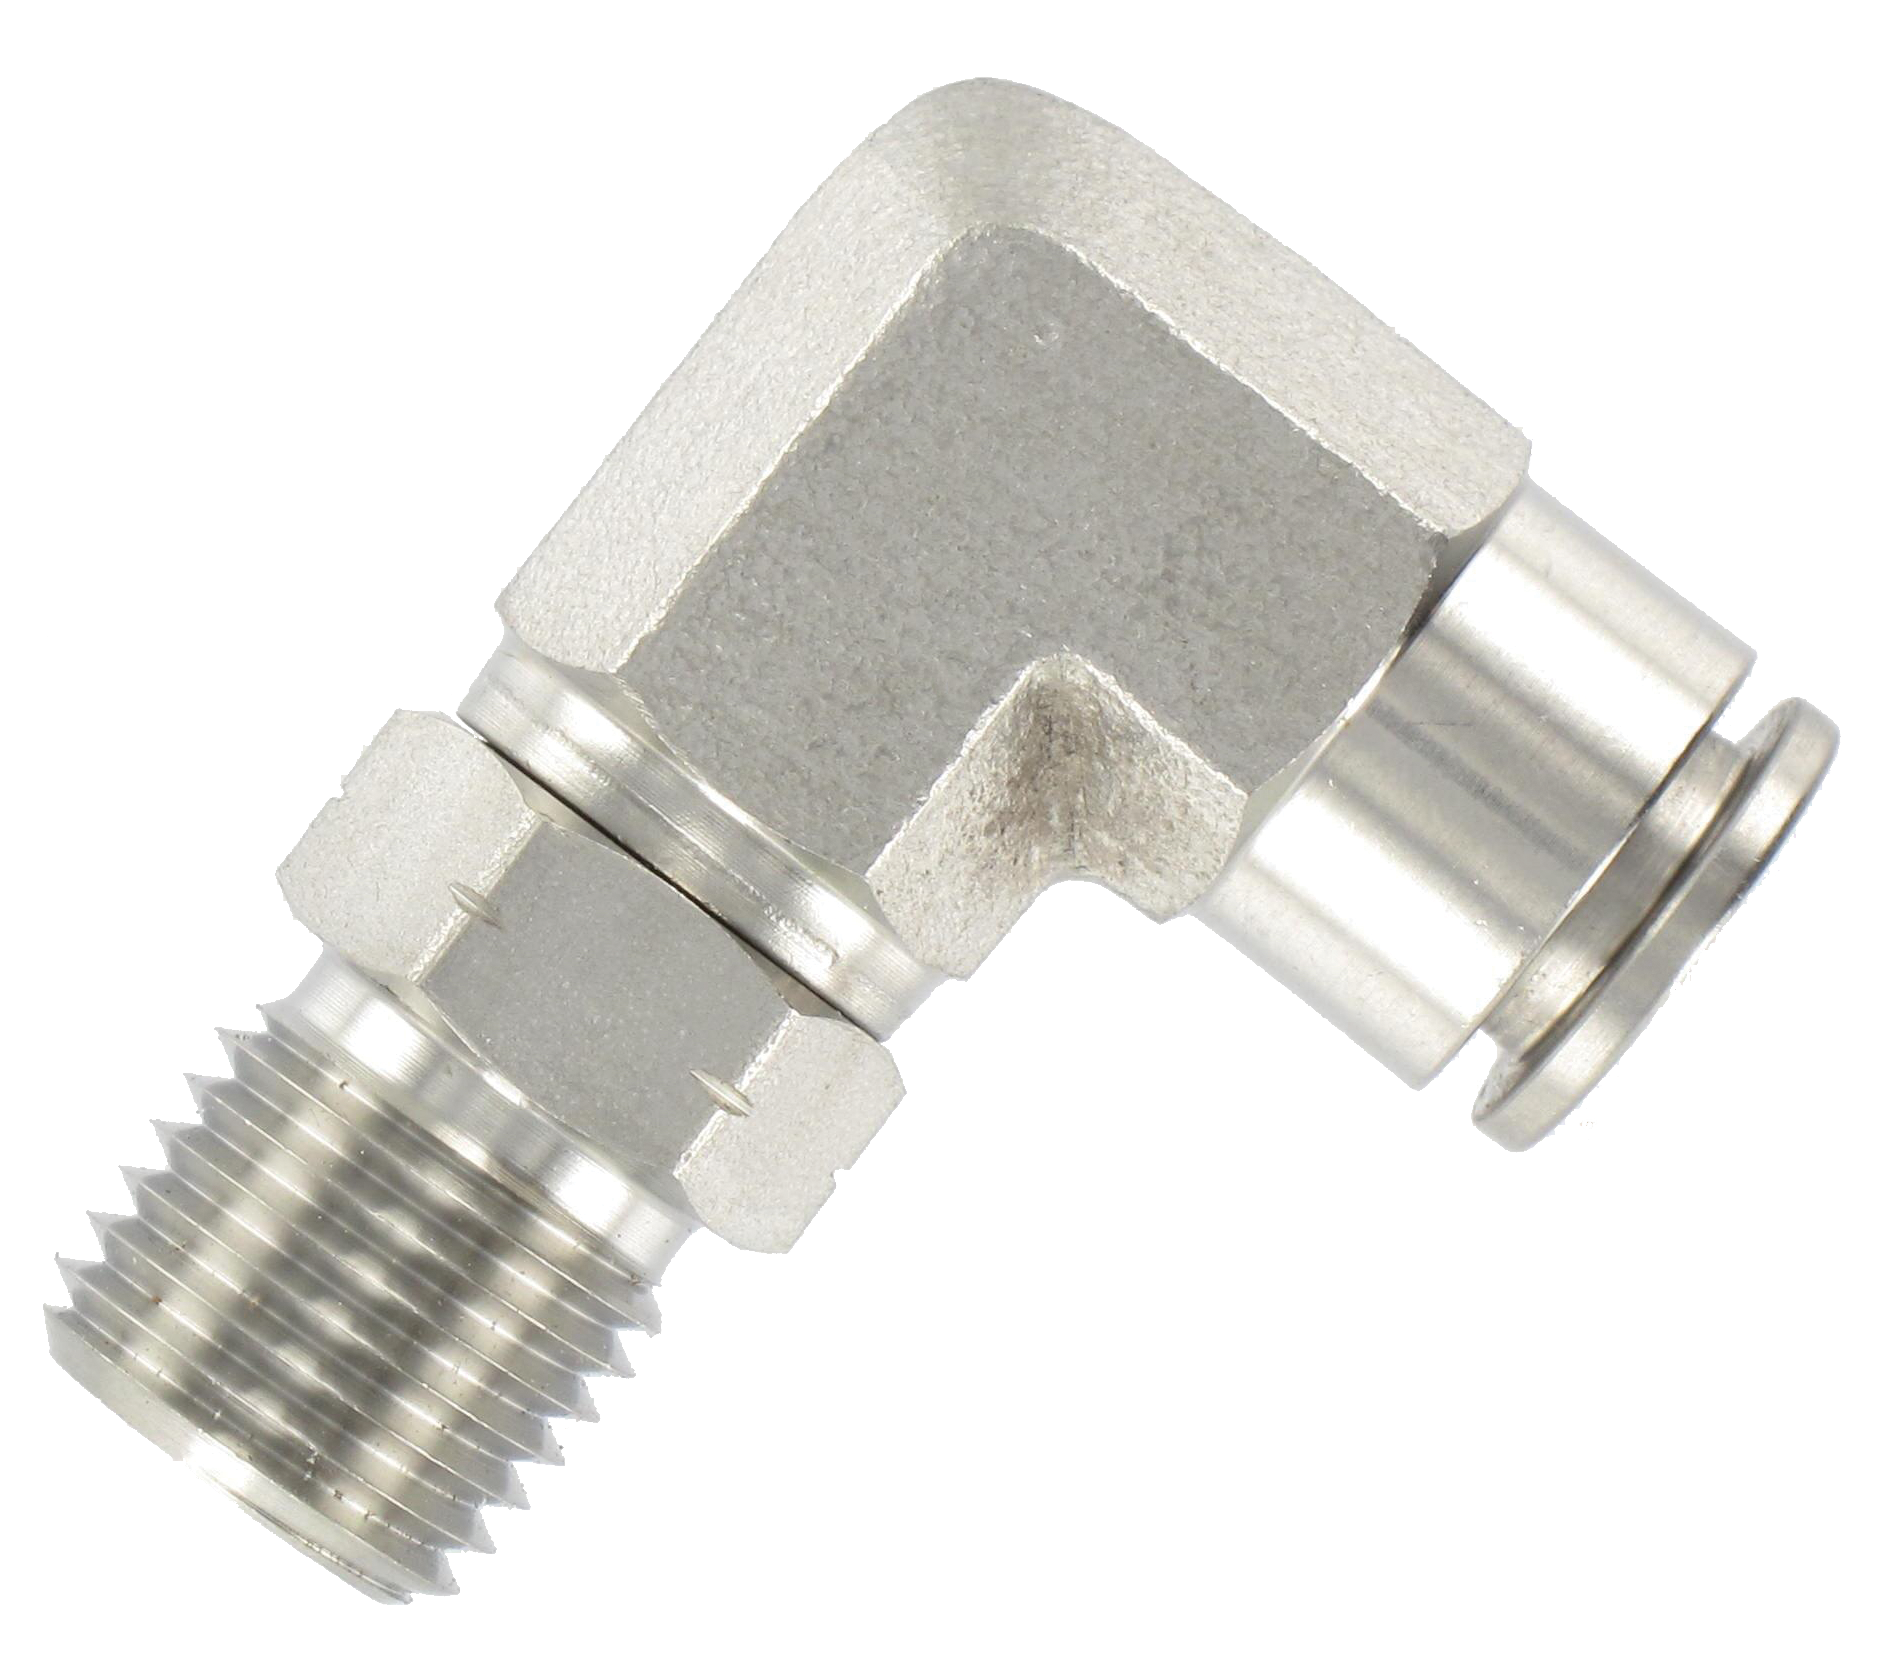 T8 - 1/8\" NPT male swivel stainless steel 316 elbow push-in fittings Pneumatic function fittings